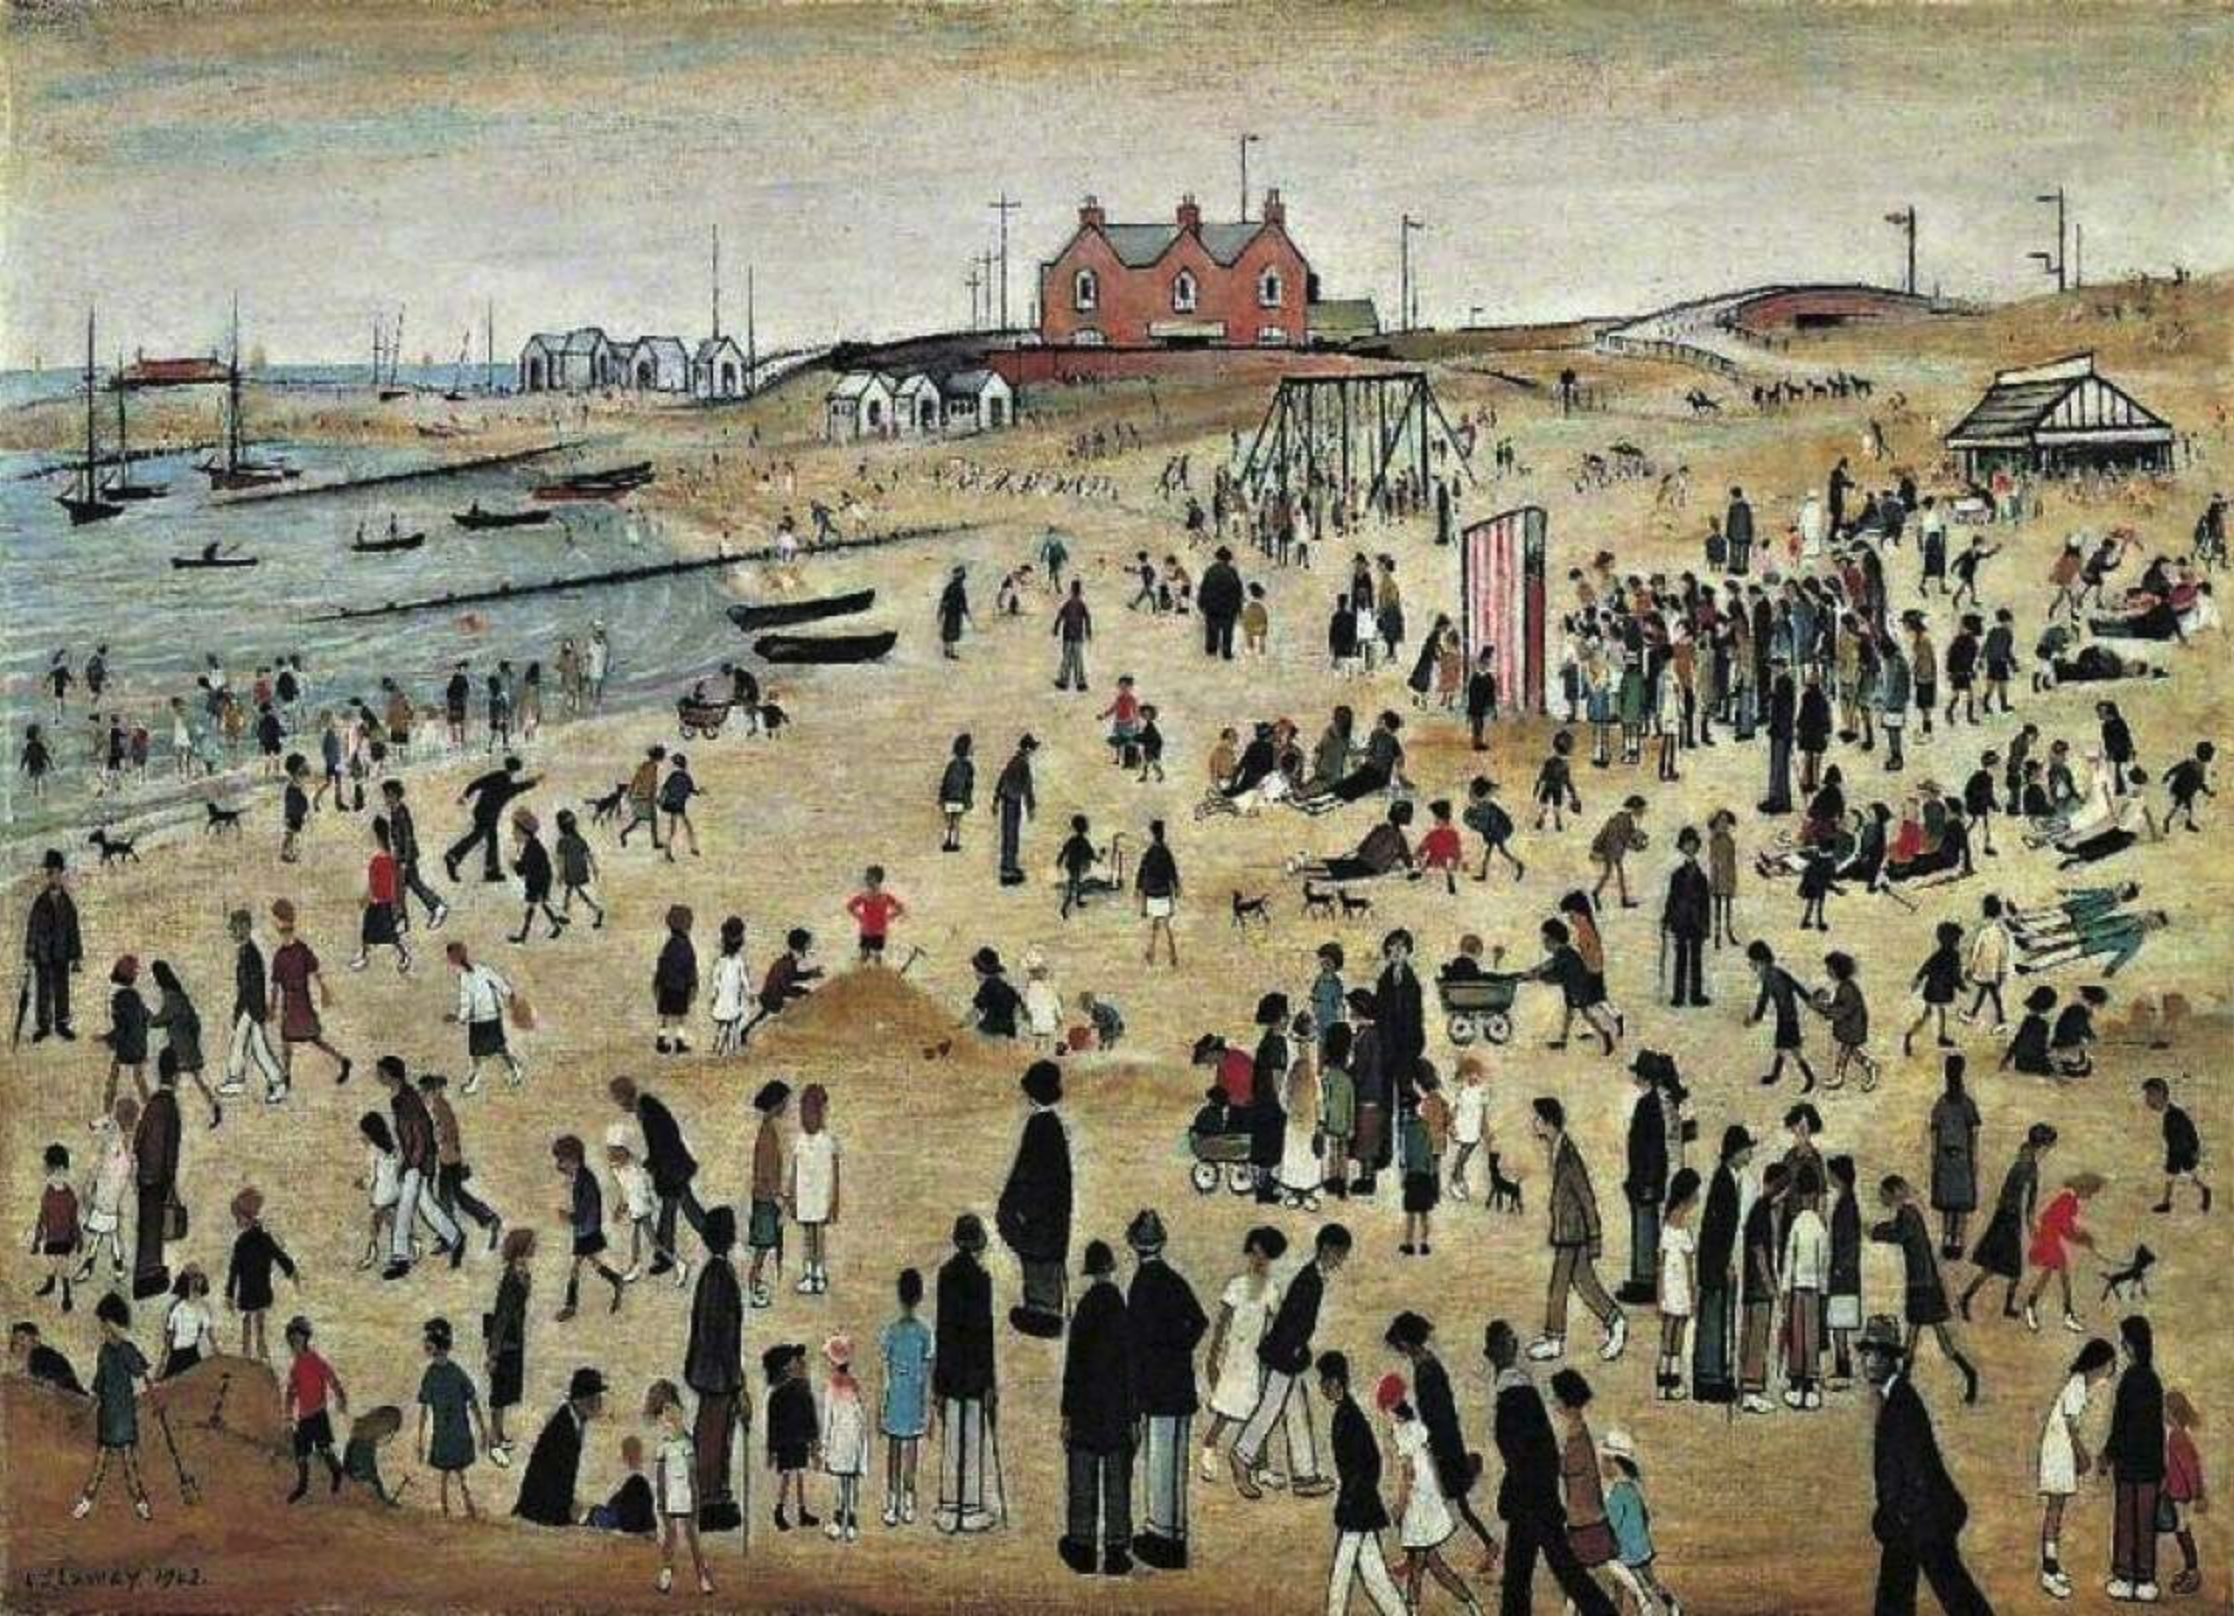 July, The Seaside (1943) by Laurence Stephen Lowry (1887 - 1976), English artist.